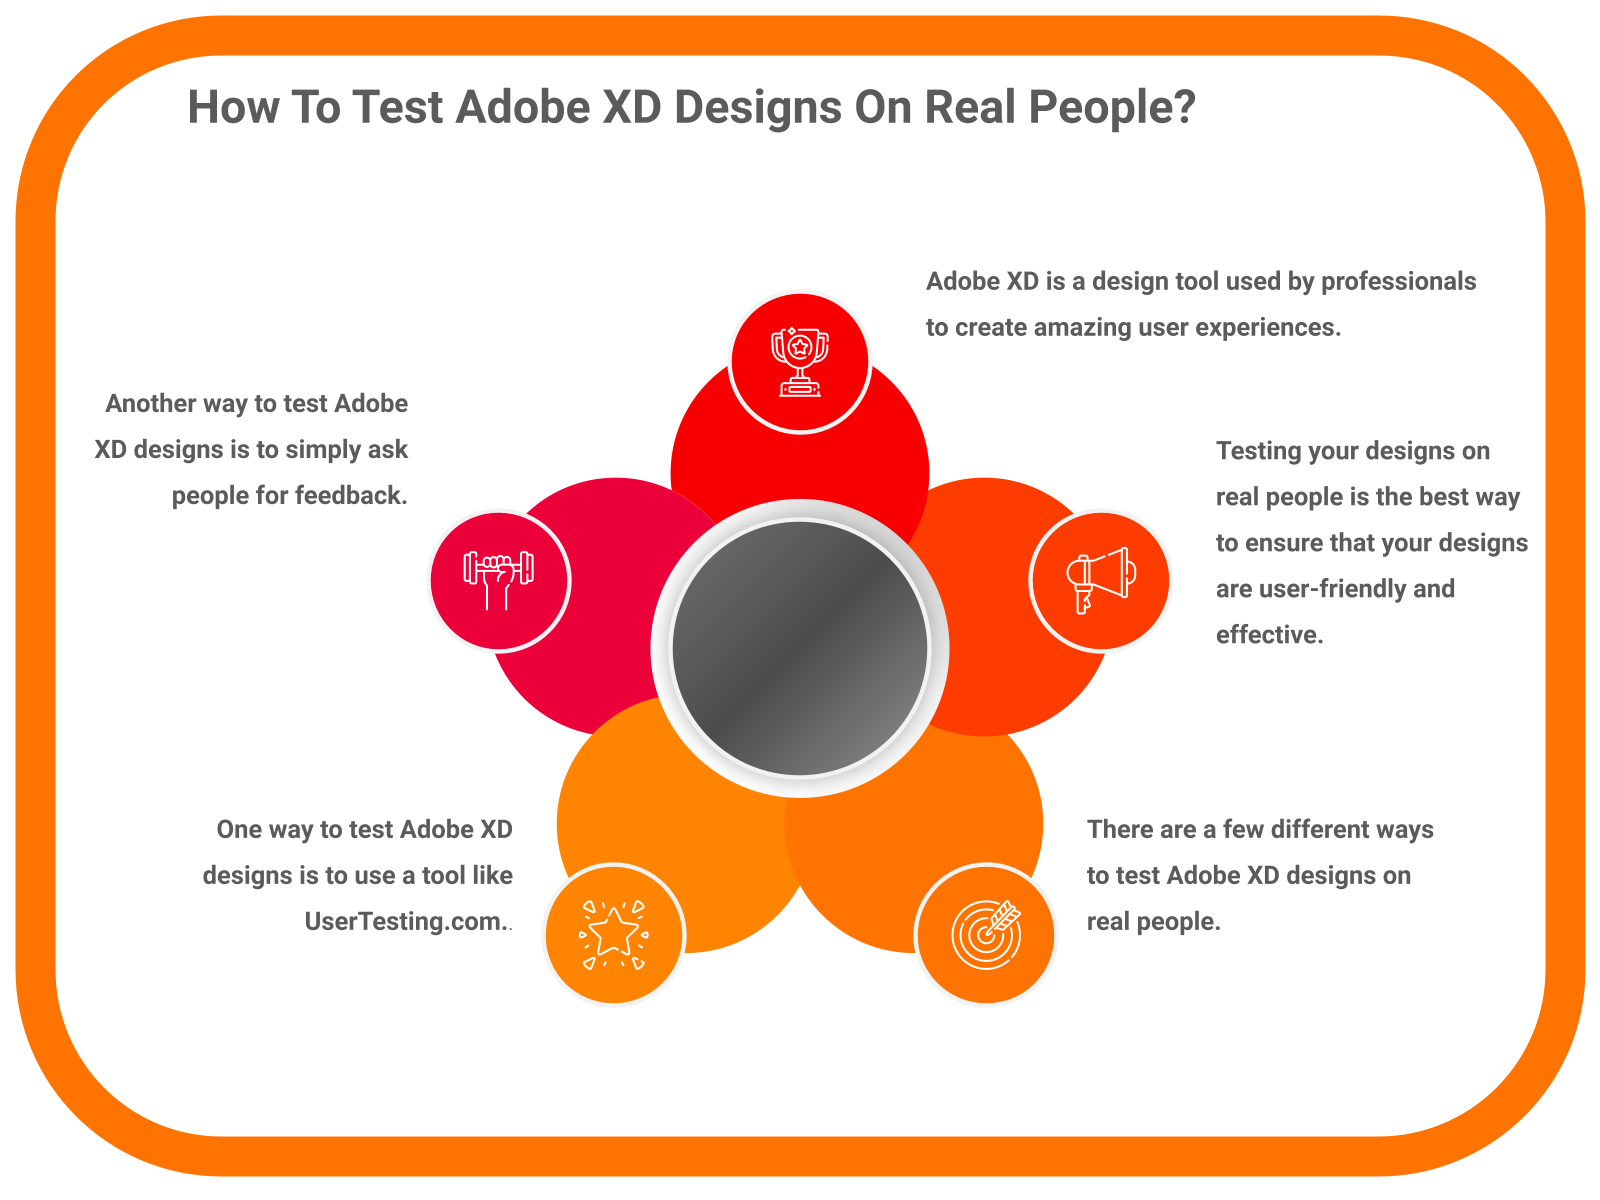 How To Test Adobe XD Designs On Real People?